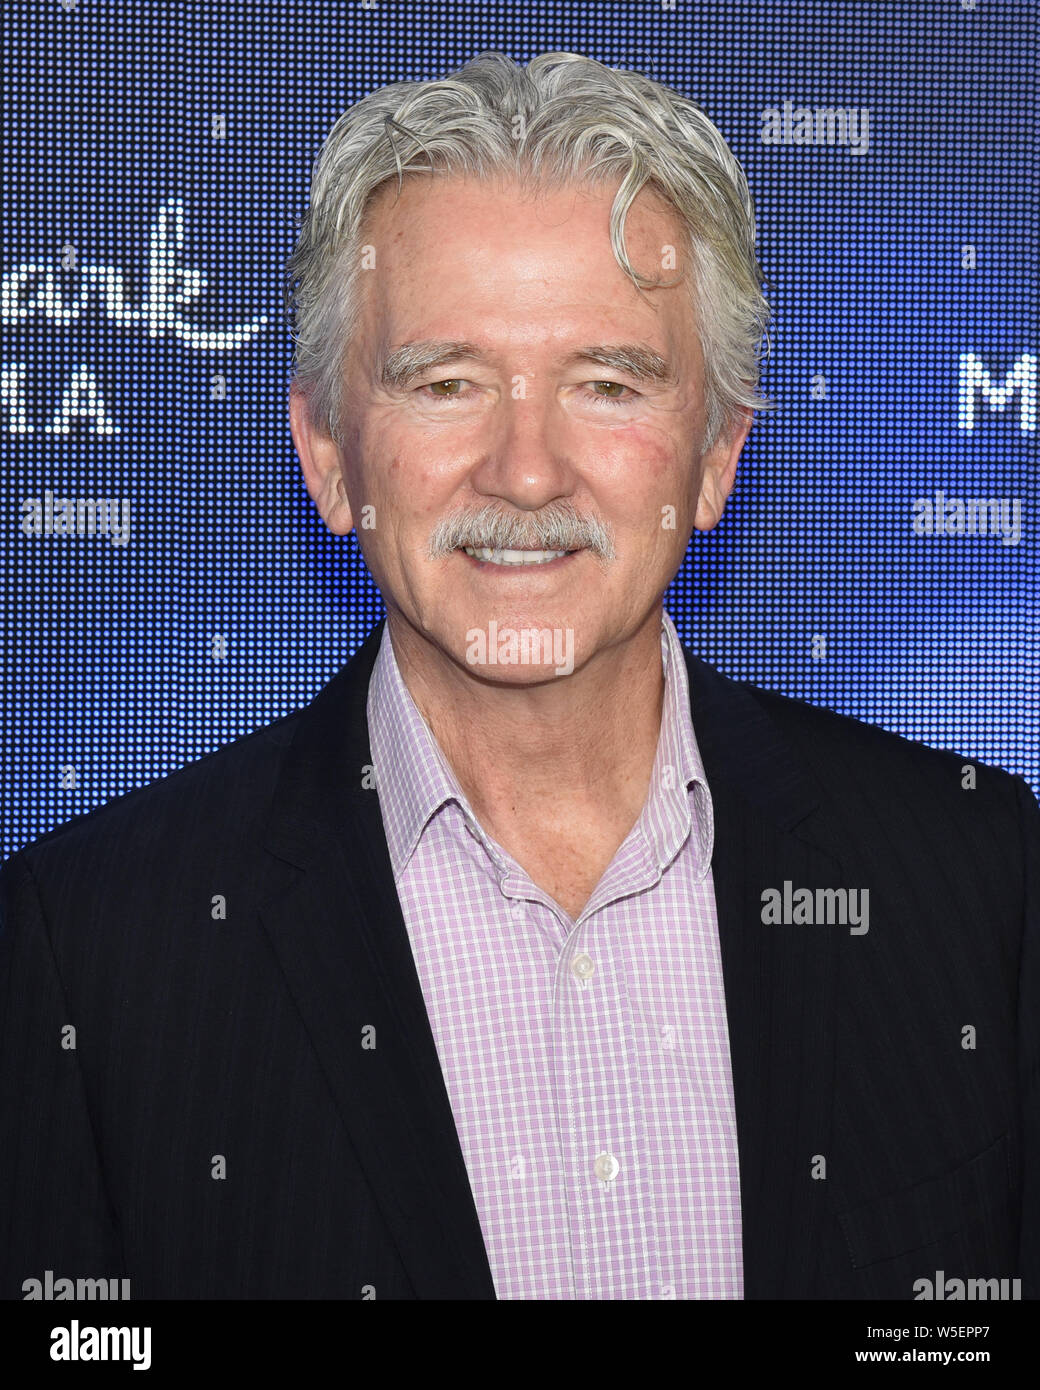 Patrick Duffy attends the Hallmark Channel Hallmark Movies Mysteries Summer 2019 at Private Residence, Beverly Hills, California on July 26, 2019 Stock Photo - Alamy